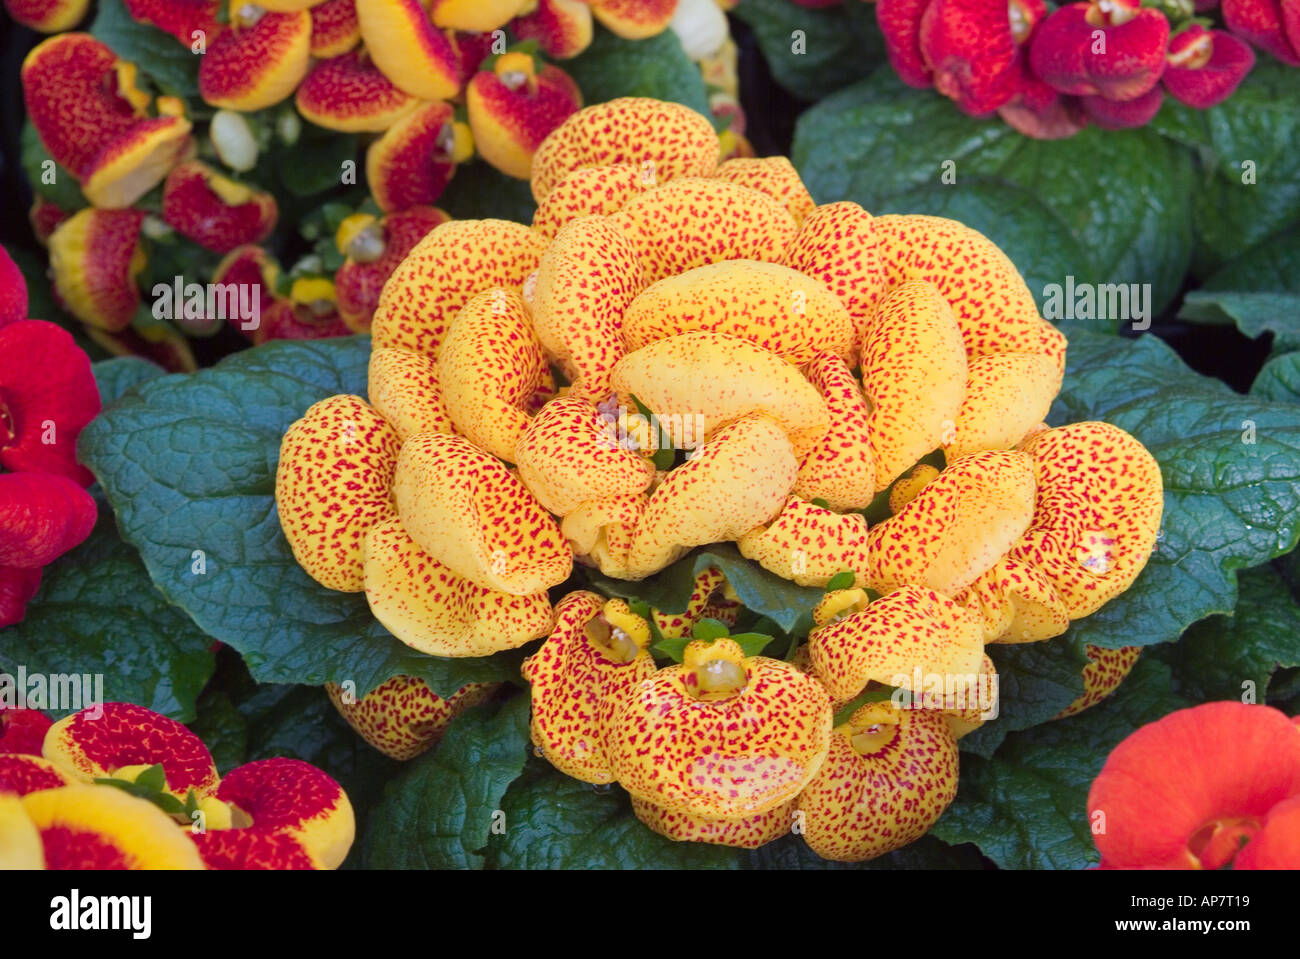 Beautiful Calceolaria Integrifolia Flower Also Called Lady S Purse Stock  Photo - Image of beauty, lady: 273467368